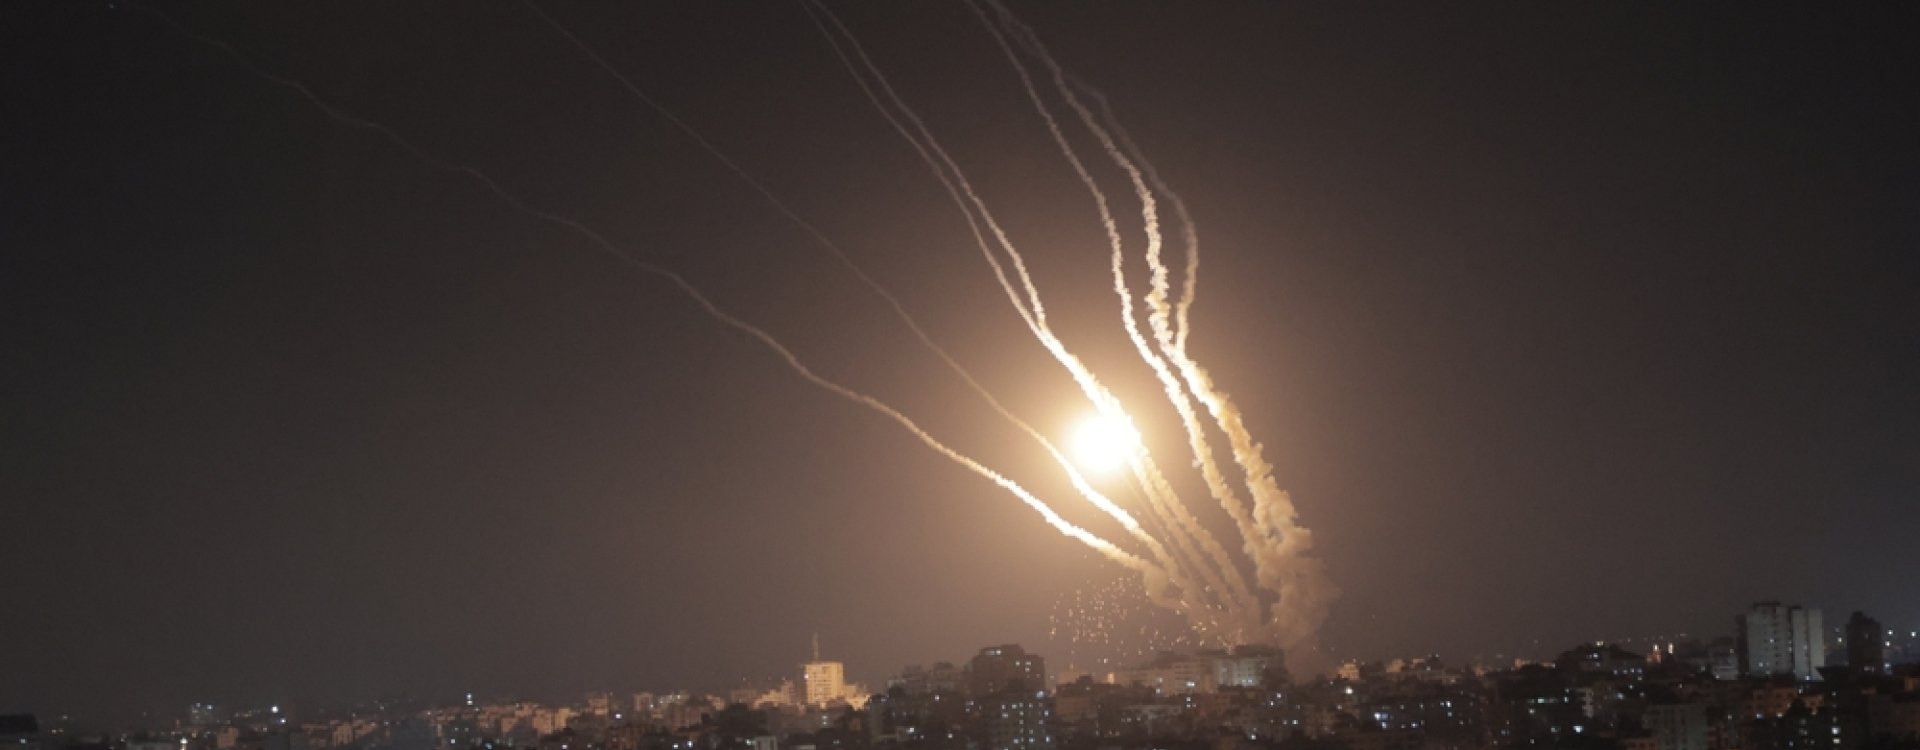 Smoke trails from rockets fired from Gaza at night